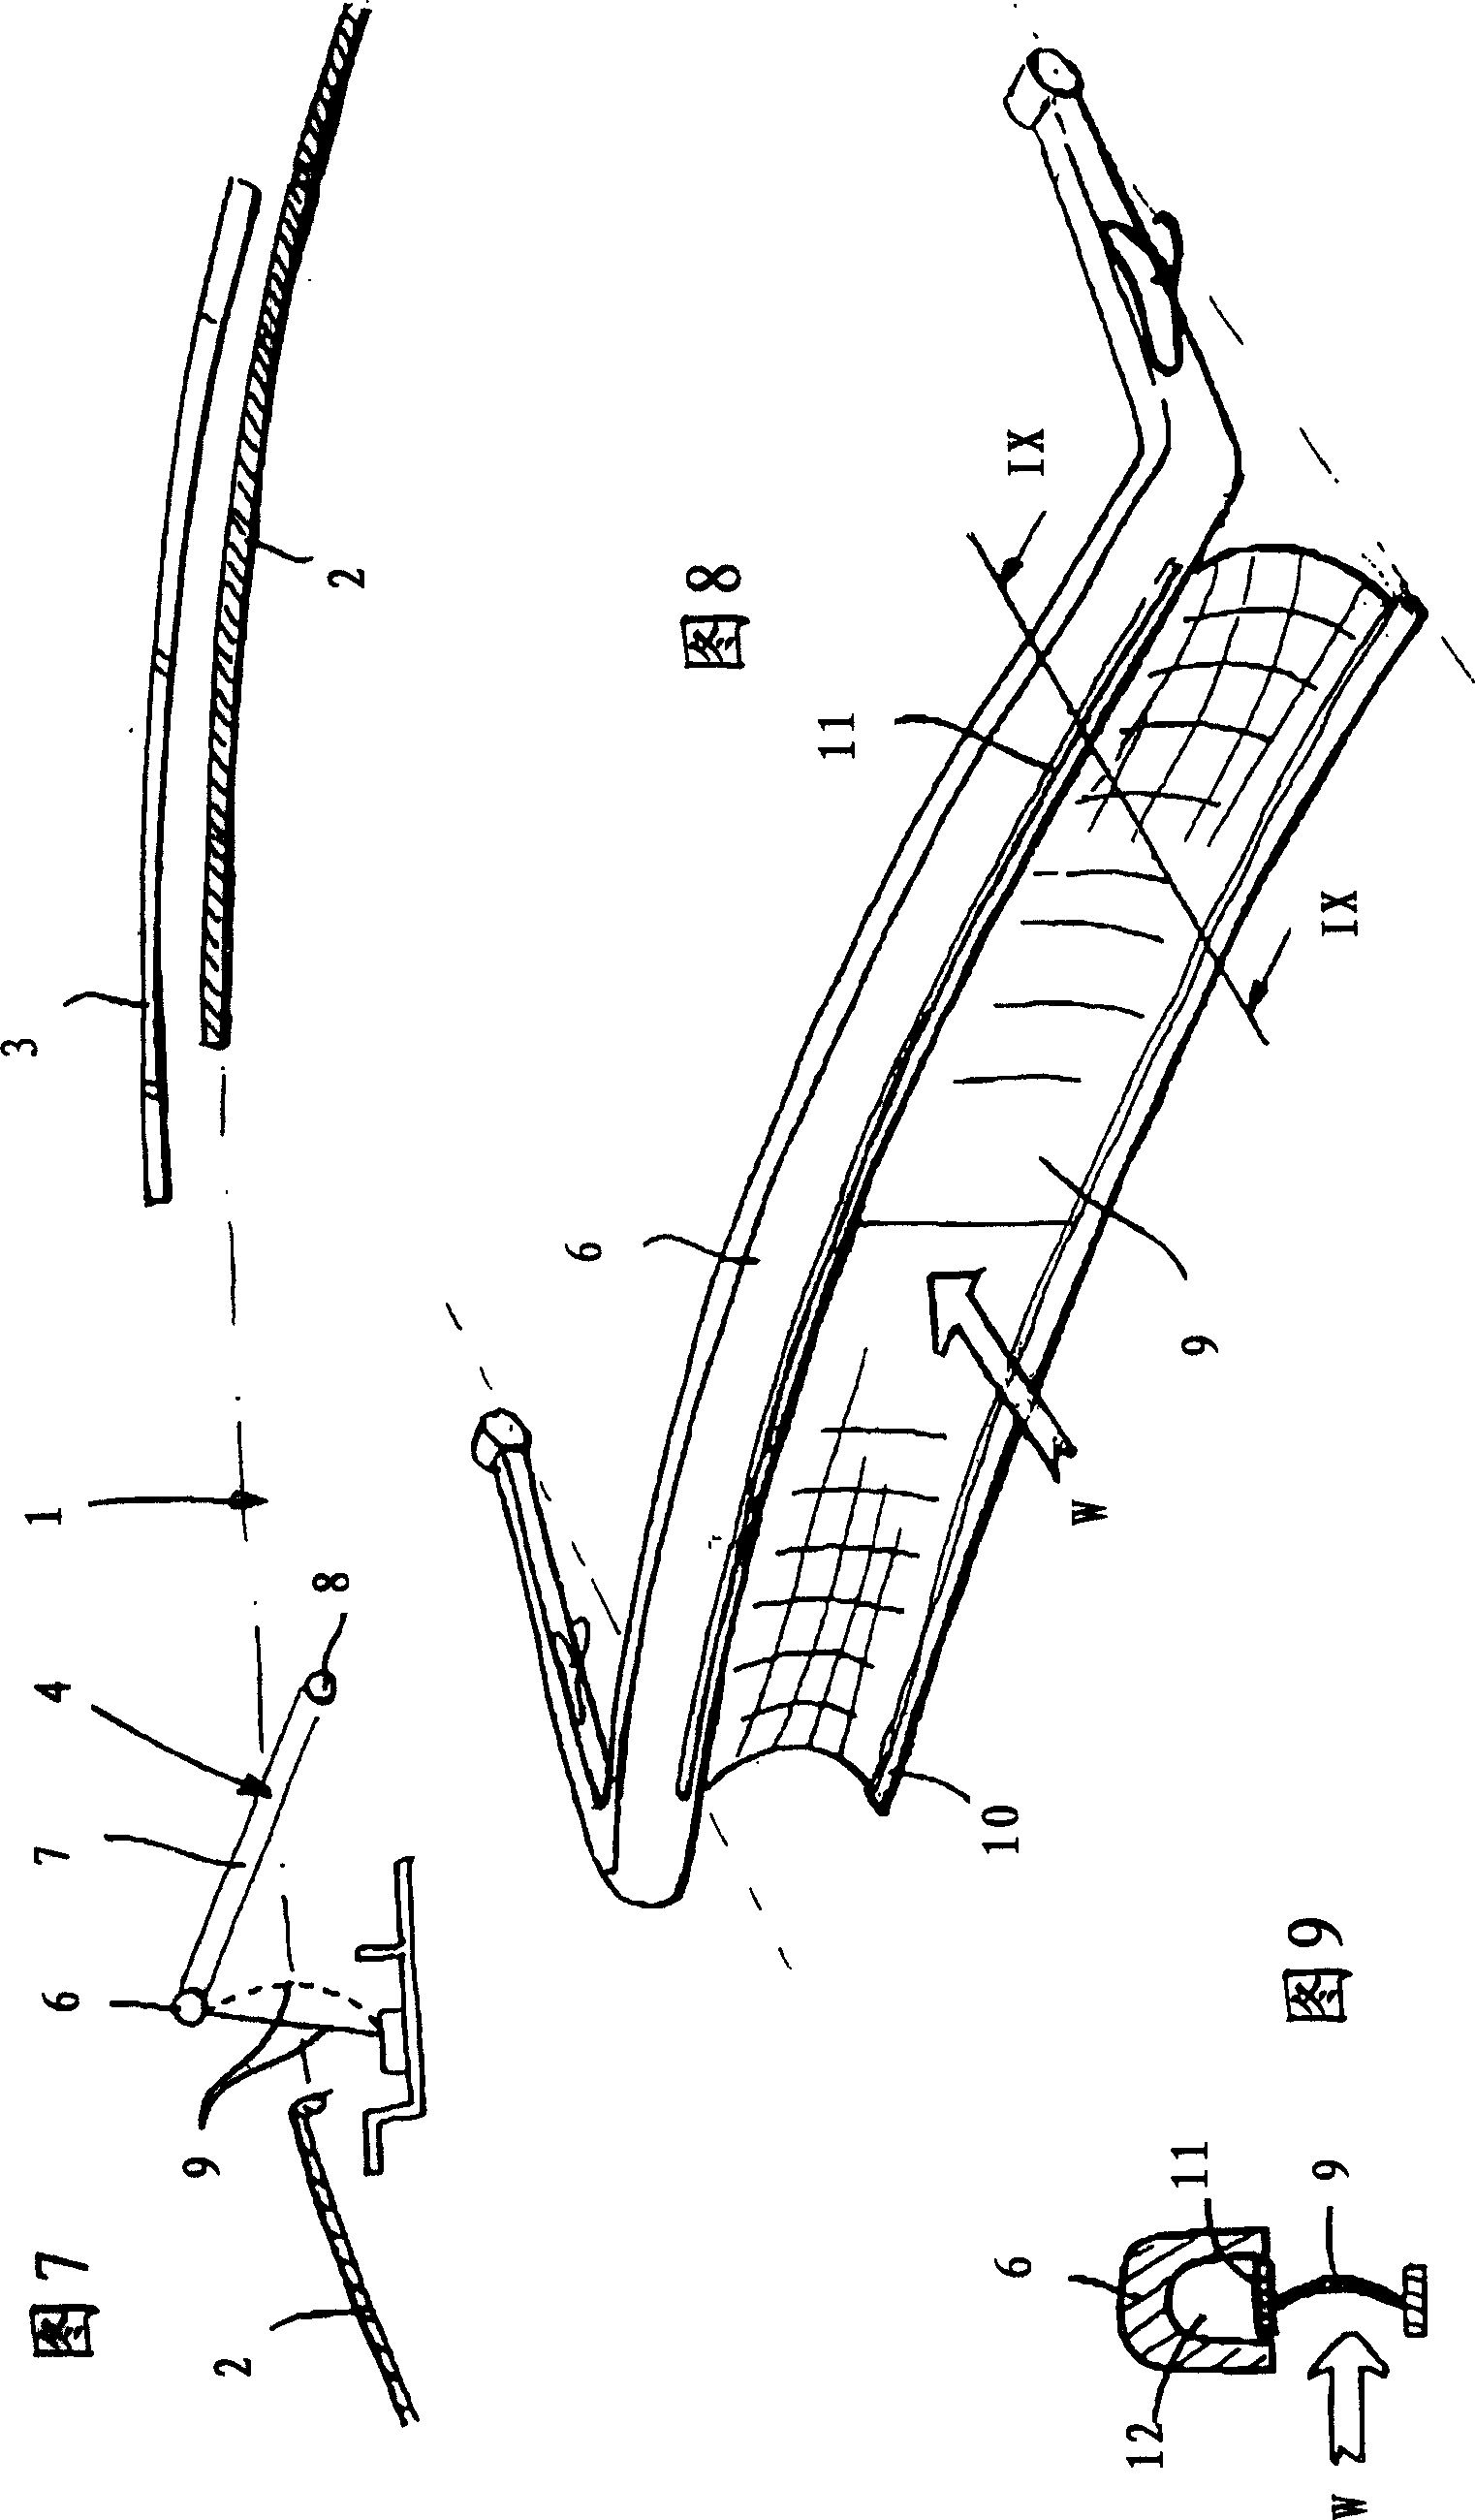 Vehicular open roof structure and wind breaker